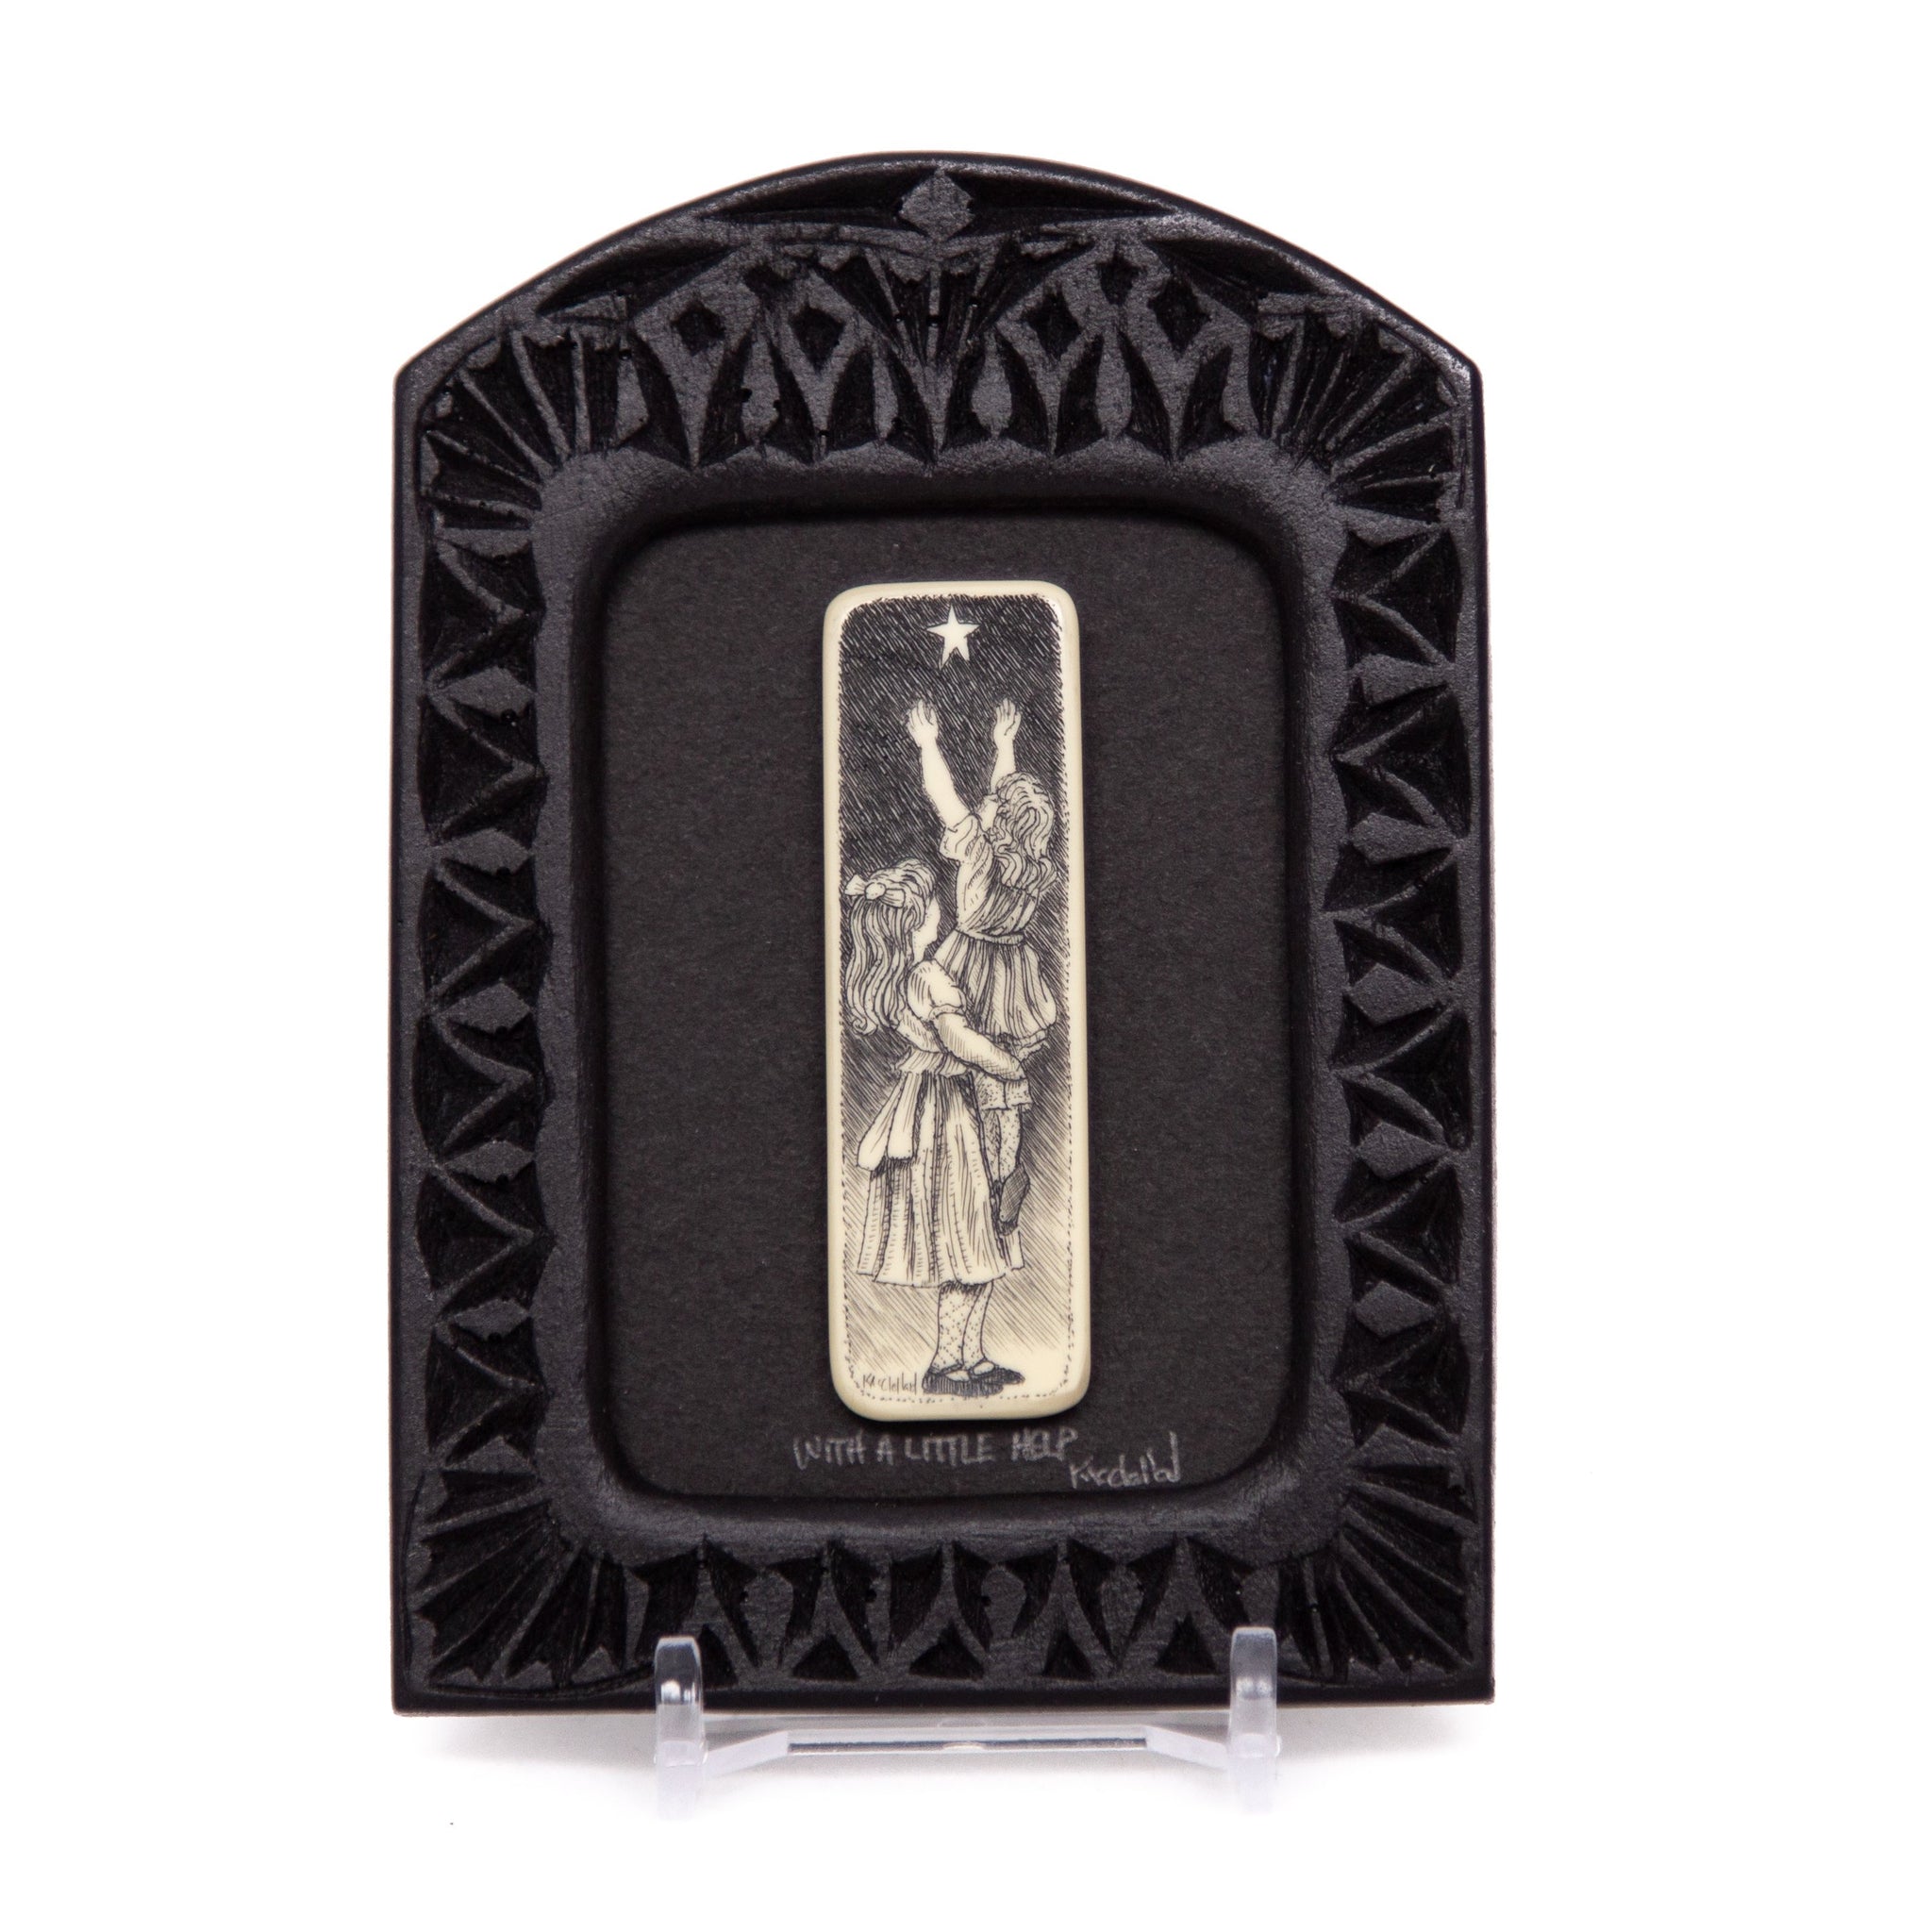 "With a Little Help" Small Chip Carved Frame